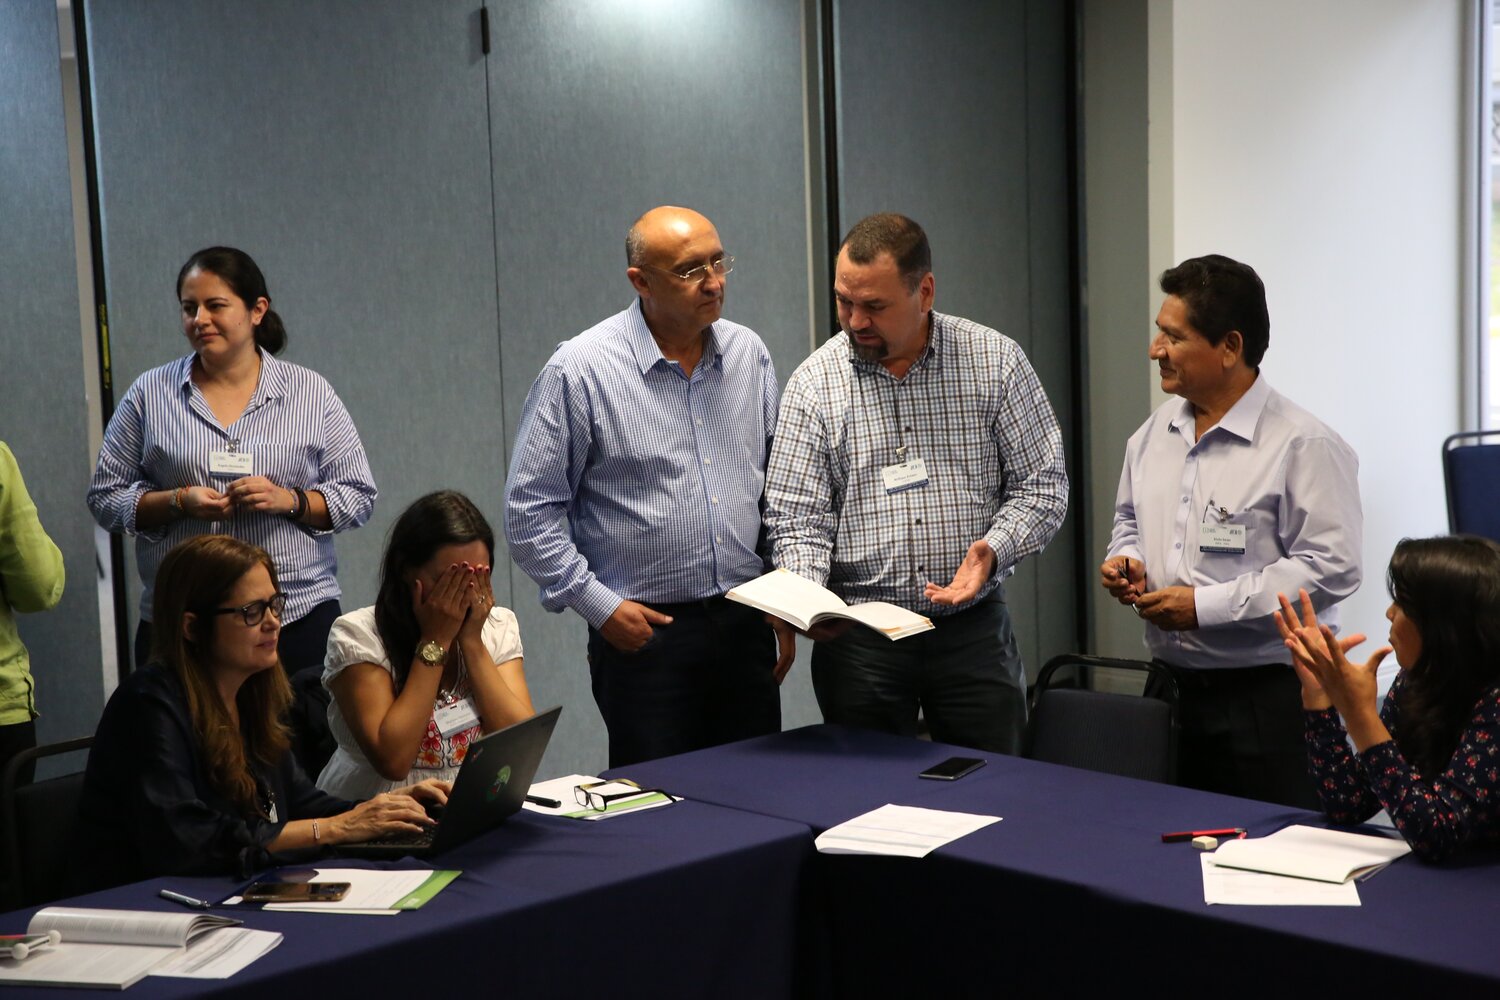 Separated into teams, GOAL workshop participants work together in developing standard operations procedures (SOPs), which are an important way to ensure consistent quality, support training and reduce risk.